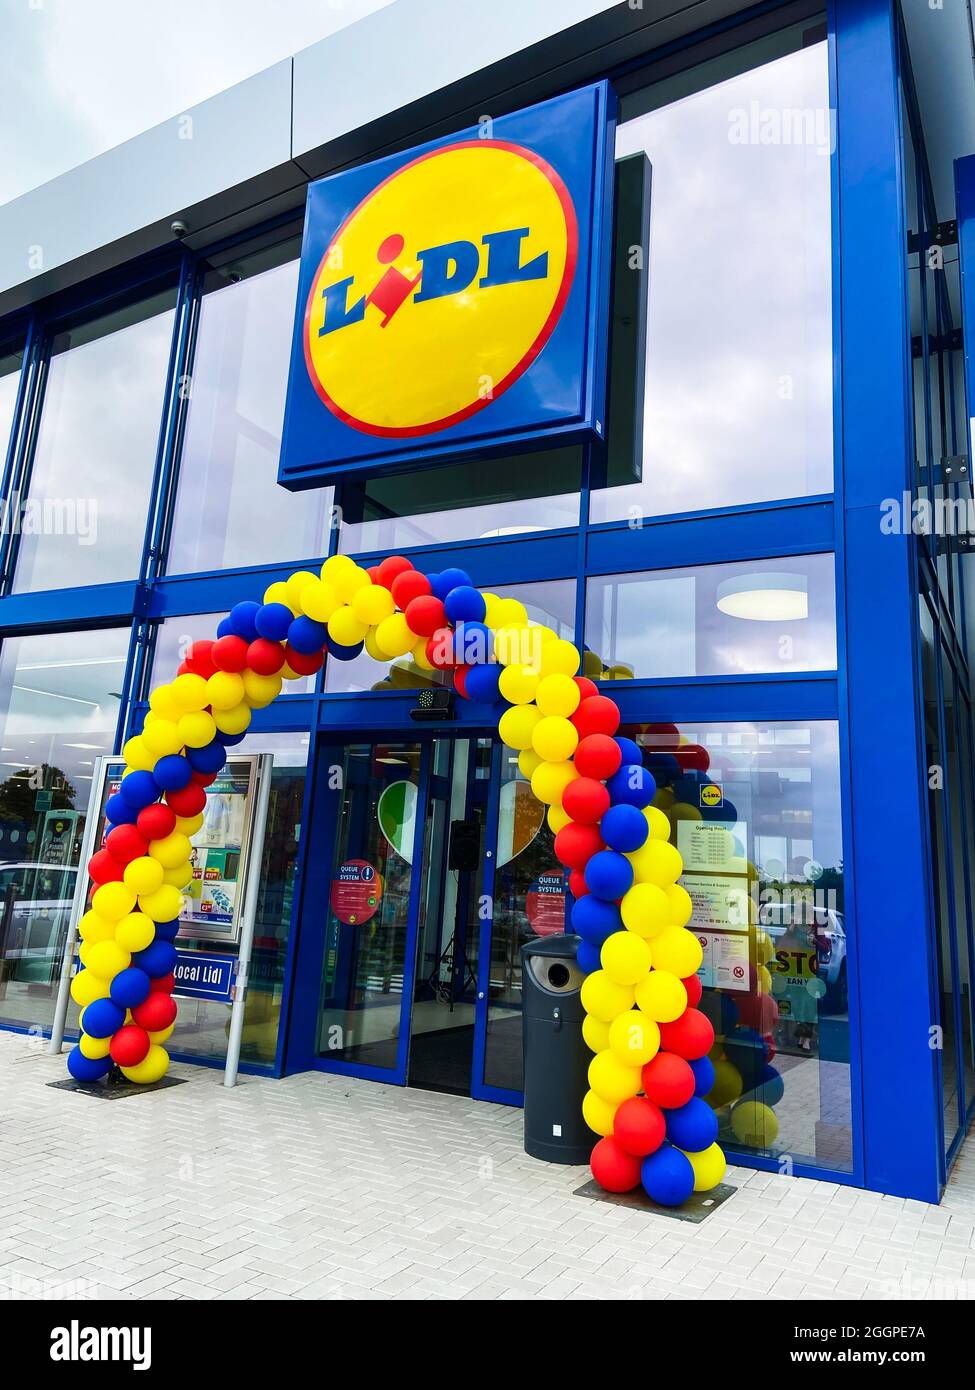 September 2nd, 2021, Cork, Ireland - the renovated Lidl supermarket at Ballyvolane reopened after being closed a few weeks for renovation Stock Photo